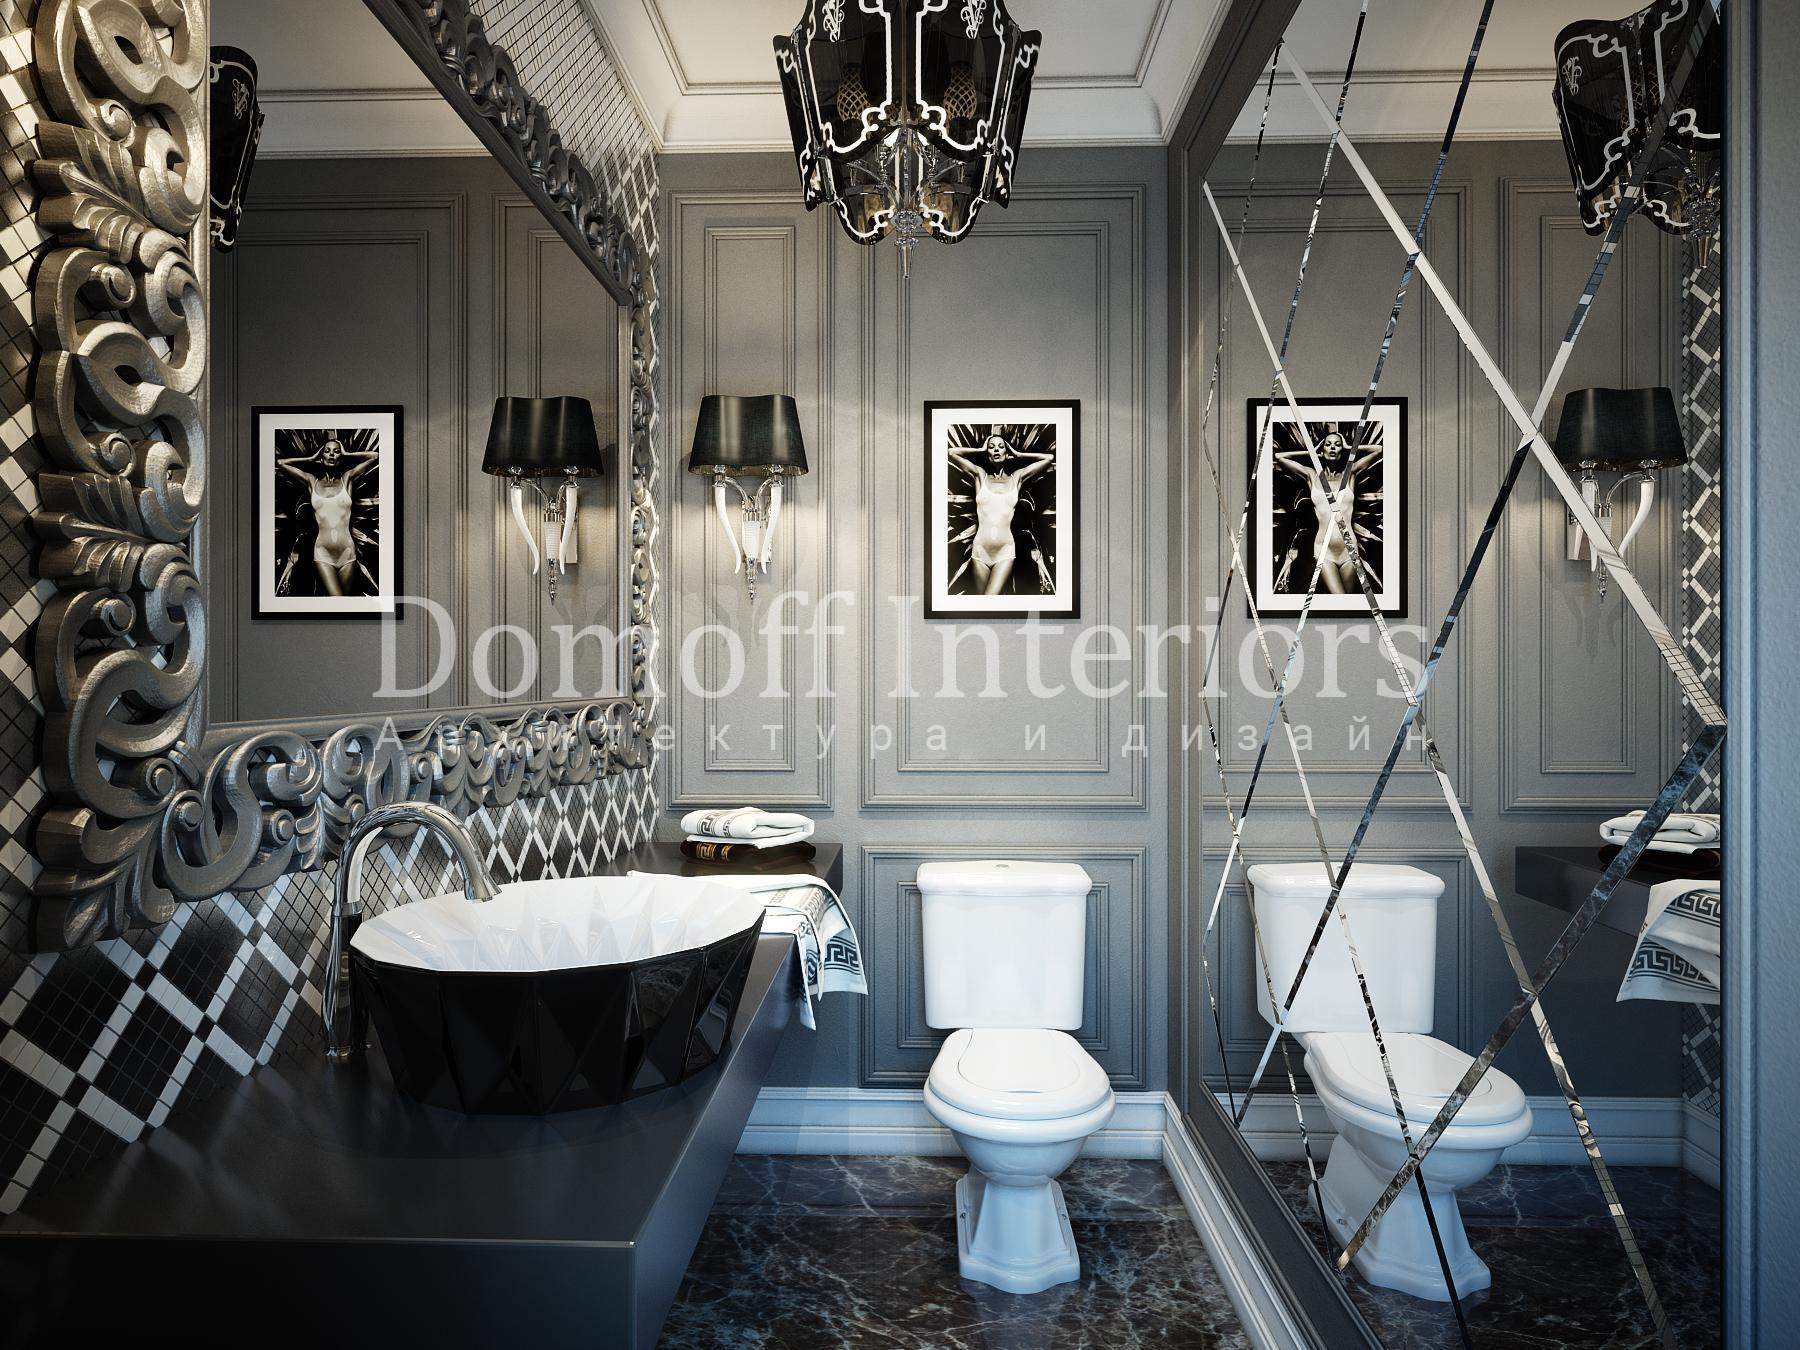 Bathroom made in the style of Contemporary classics